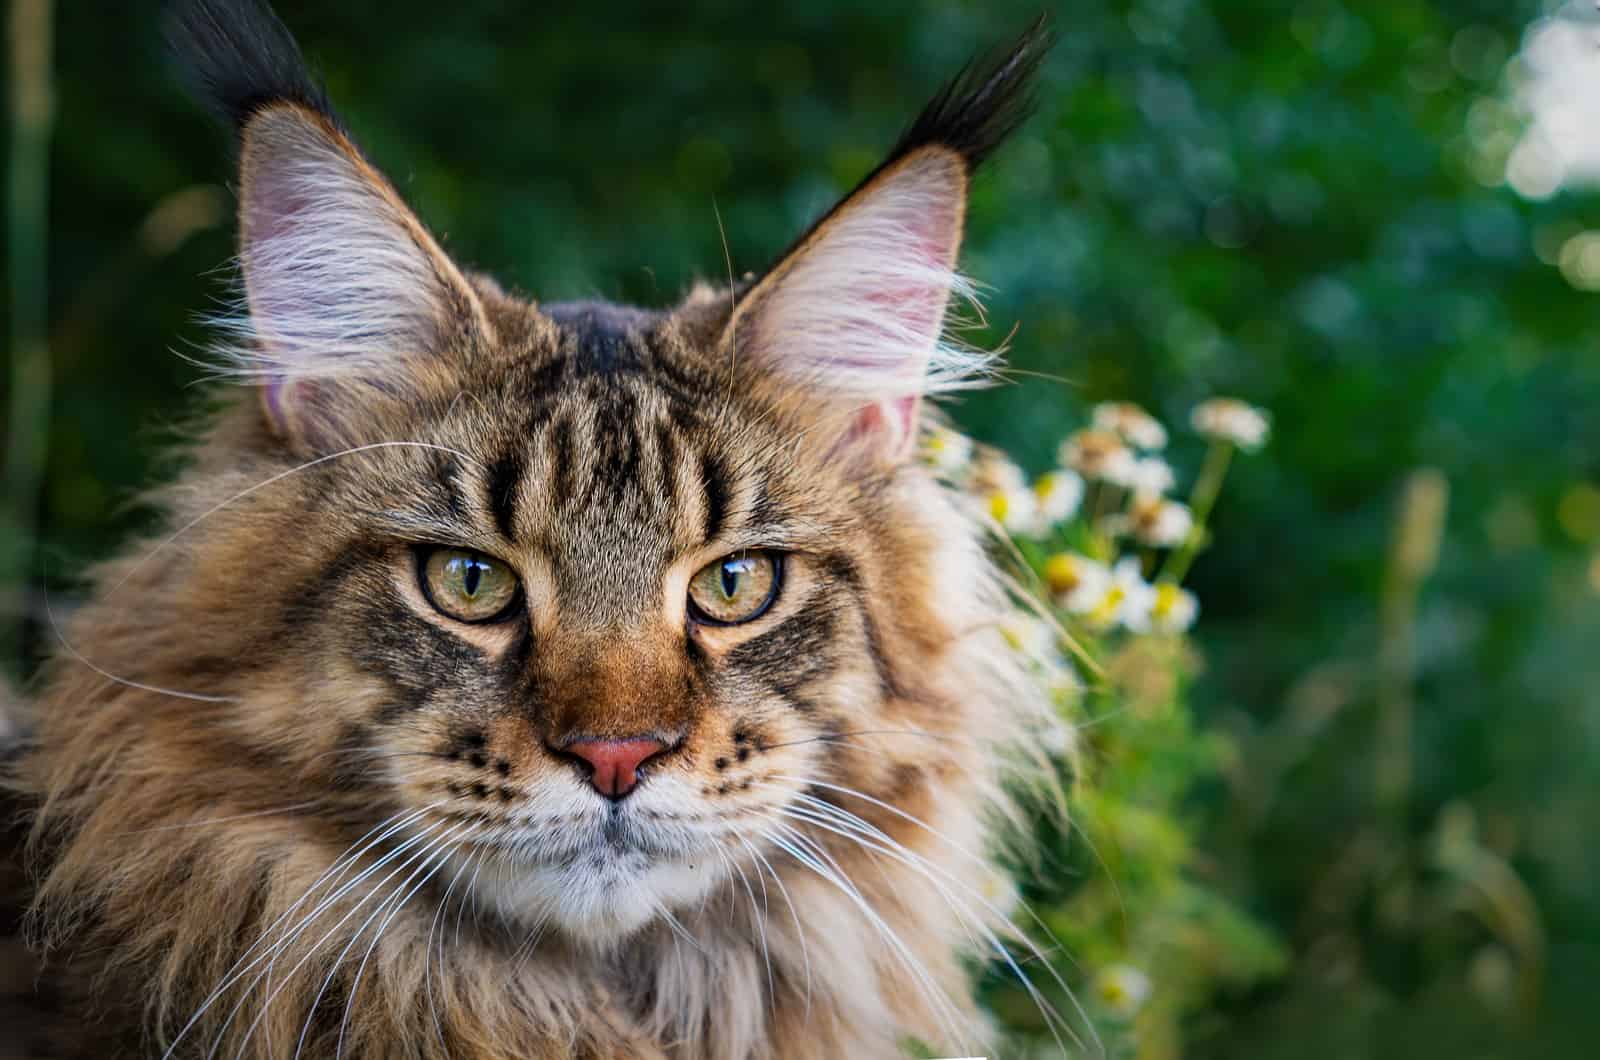 sitting calm and serious furry Maine Coon cat